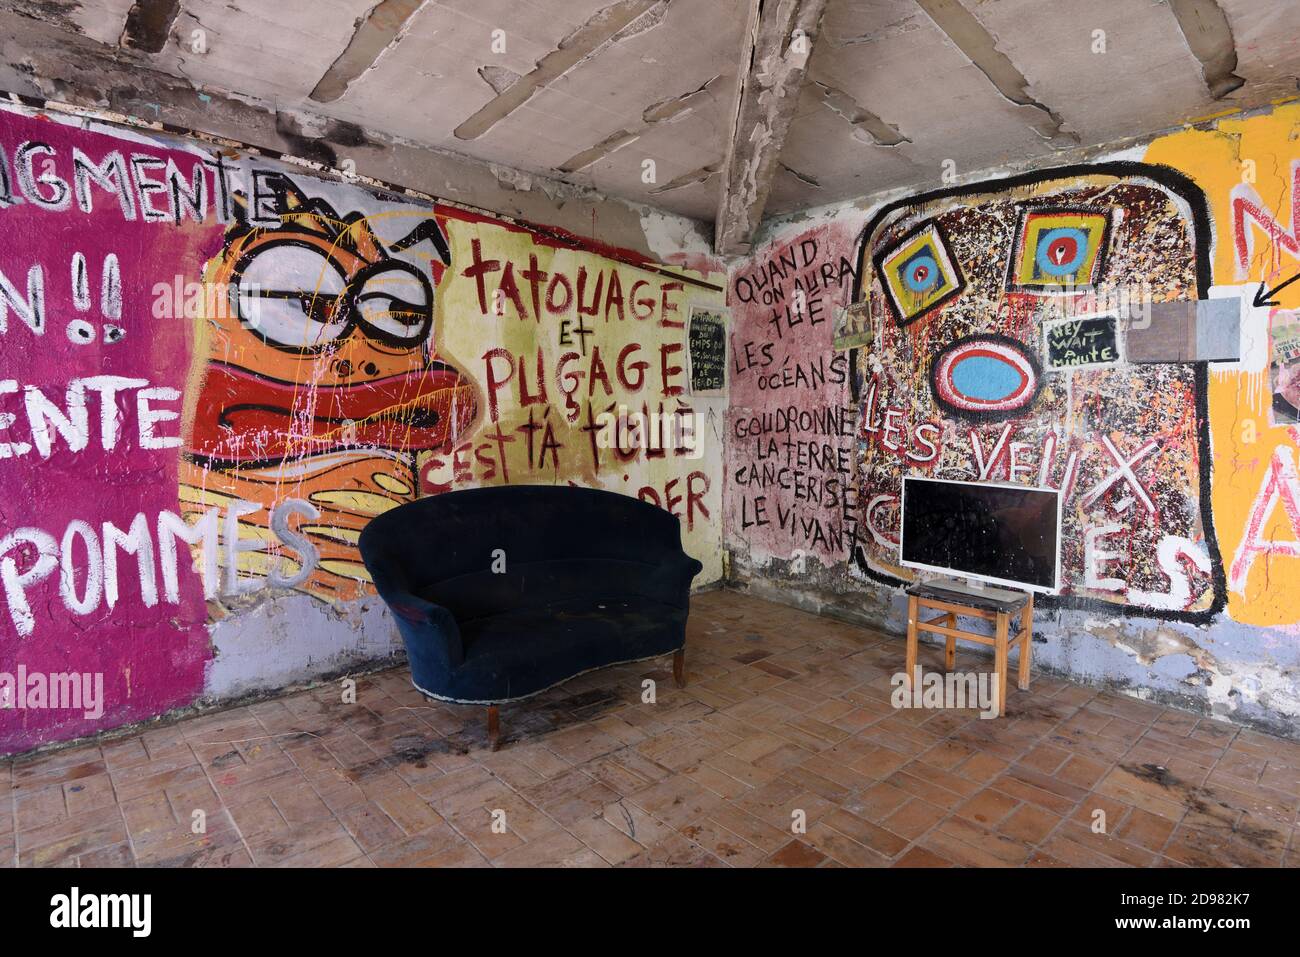 Abandoned Graffiti Covered House Interior or Living Room with Old Sofa and Televisin Screen or Urbex Scene France Stock Photo